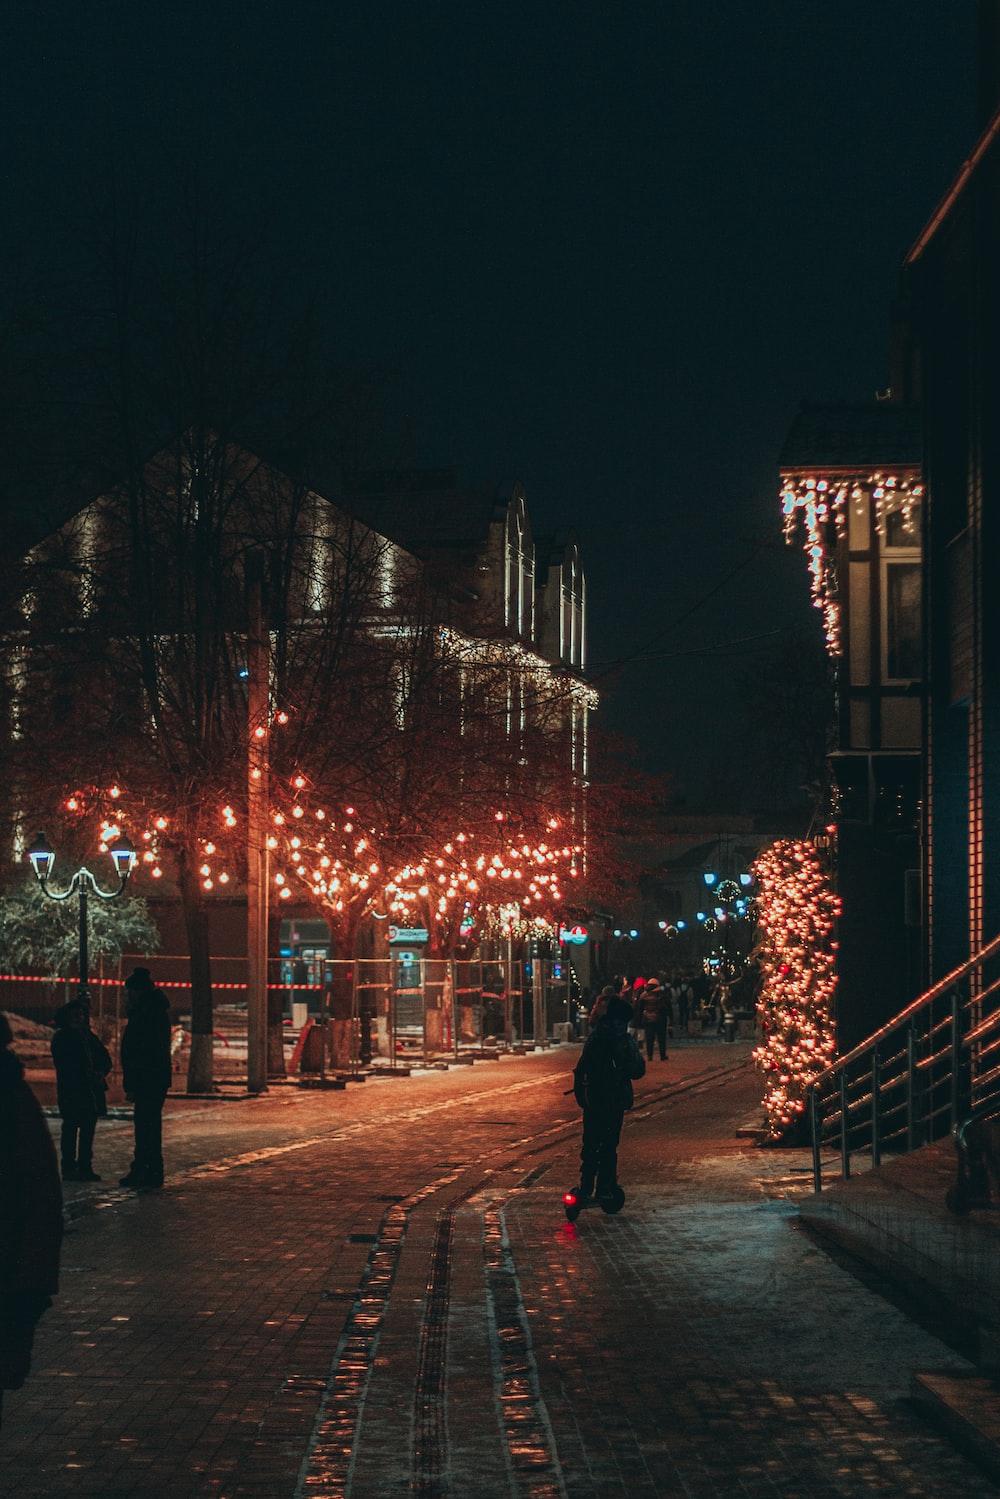 A Group Of People Walking On Sidewalk With Christmas Lights